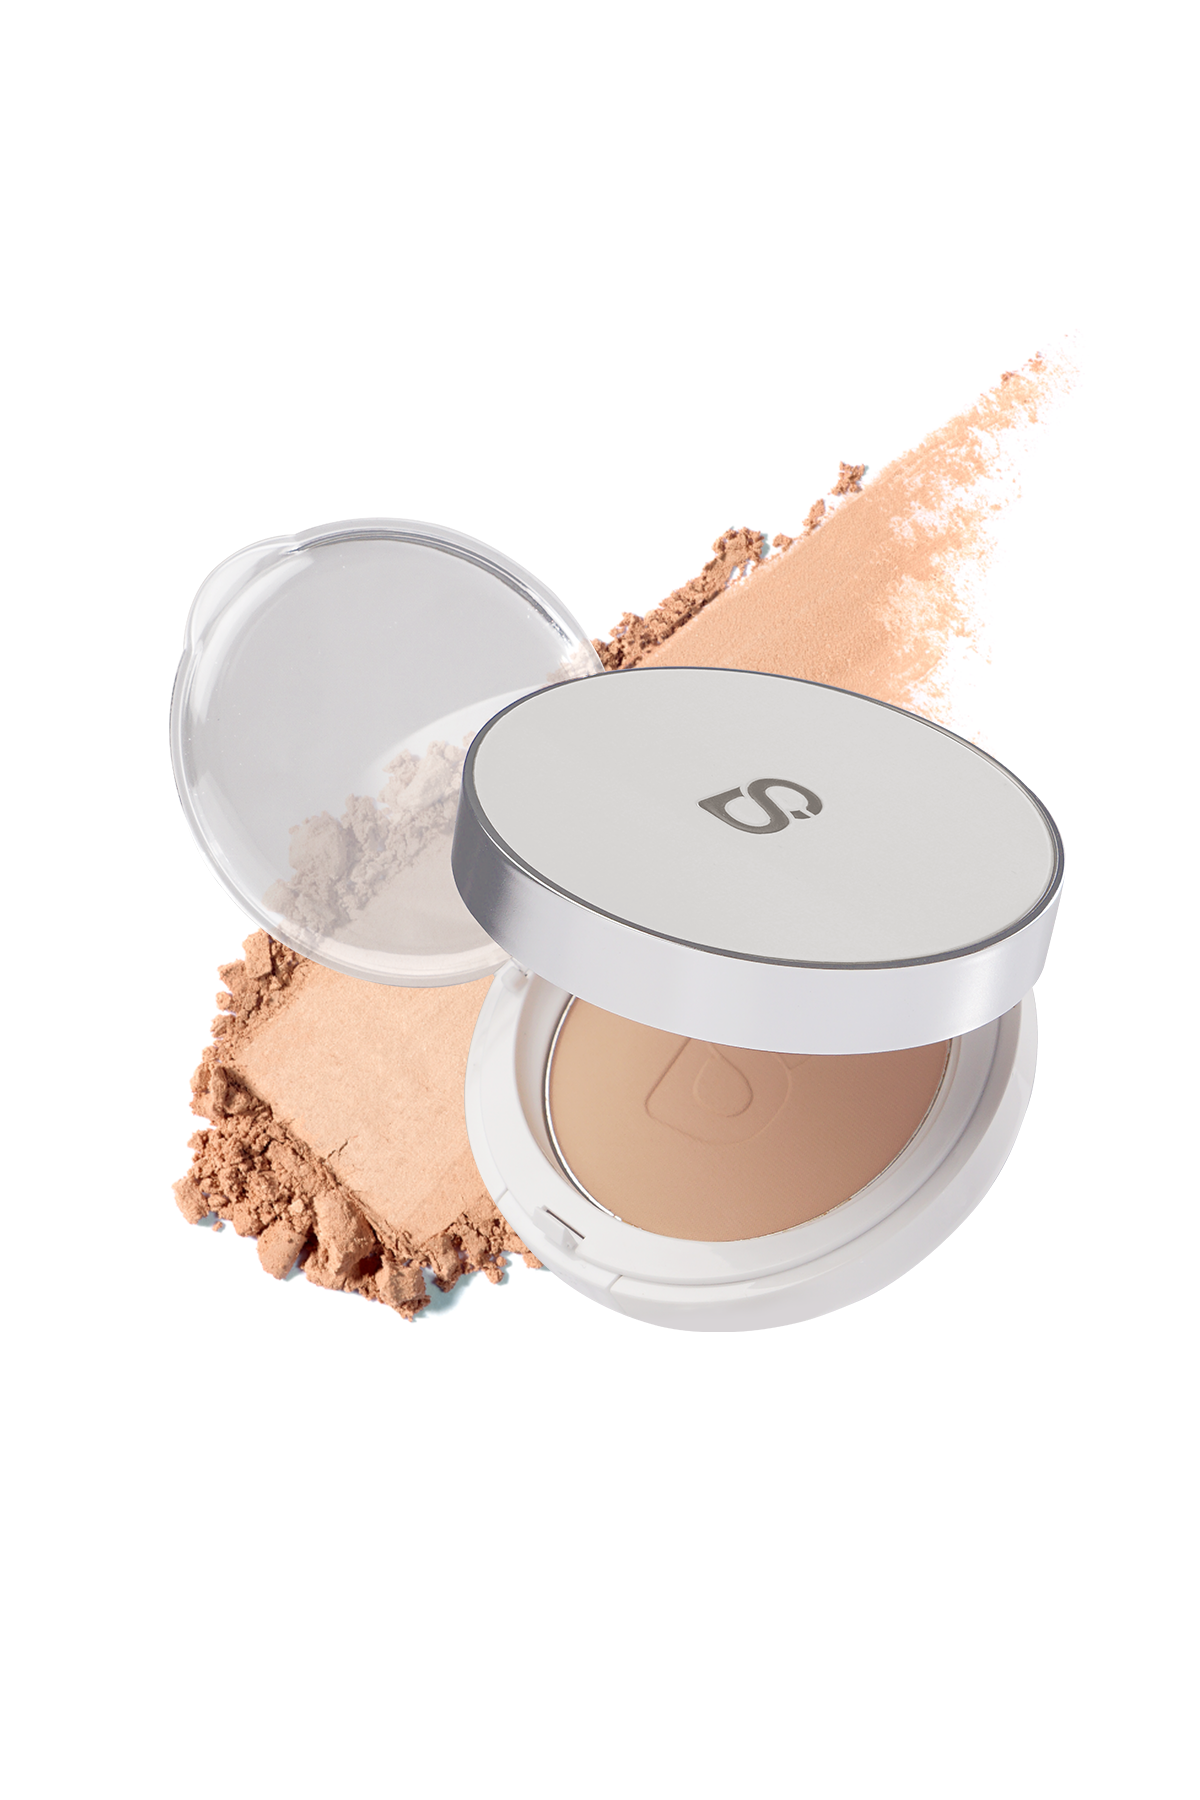 BSB - Everyday Perfect Blurring Compact Powder